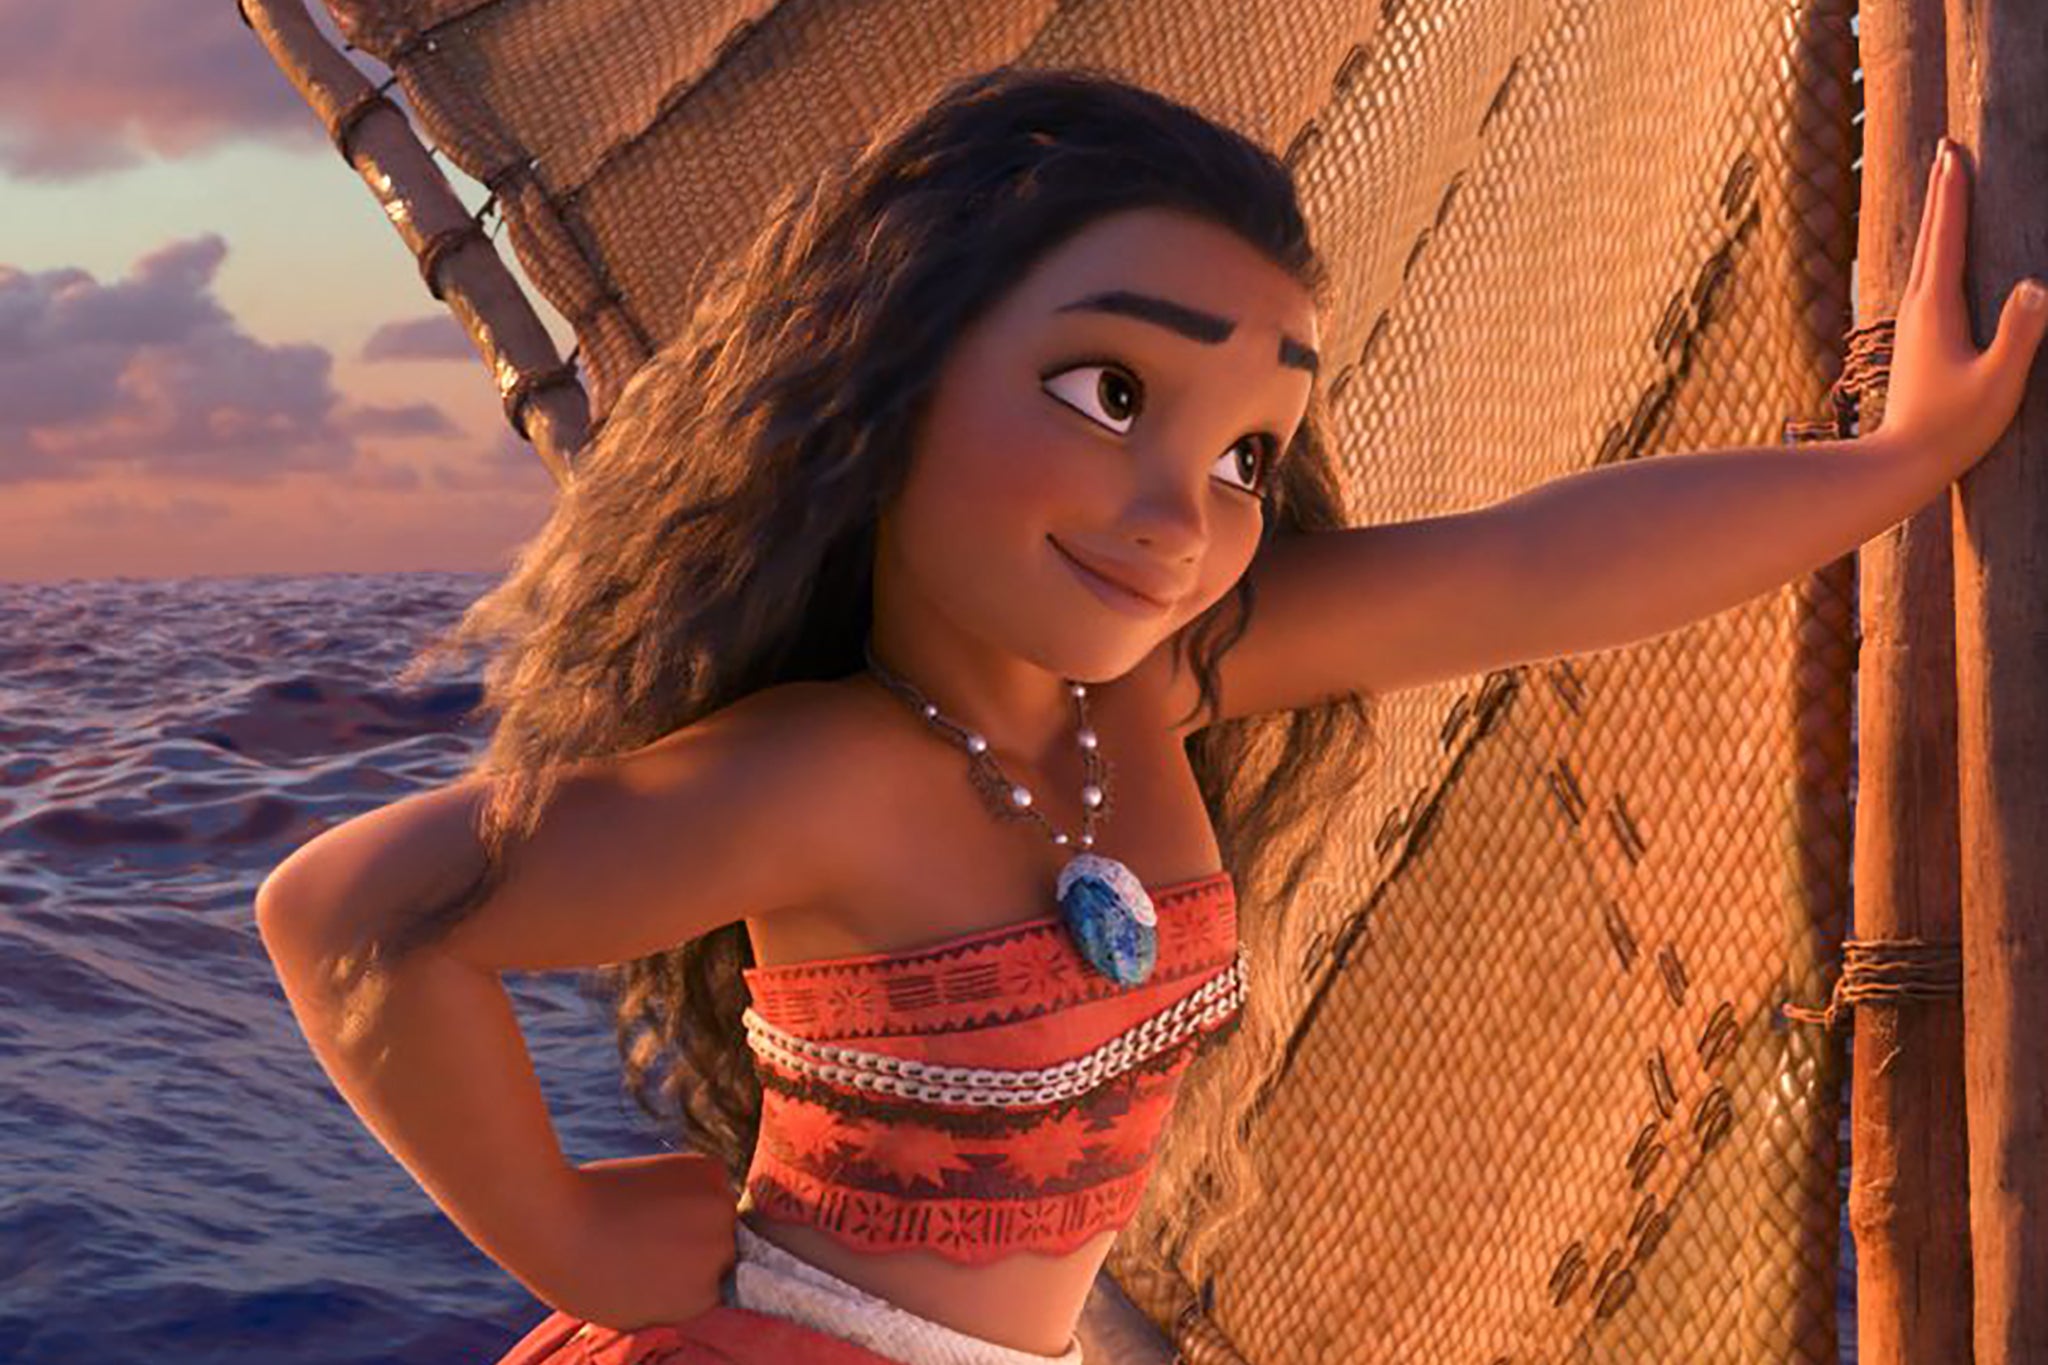 Ocean smoothing: The titular hero of ‘Moana’, voiced by Auliʻi Cravalho